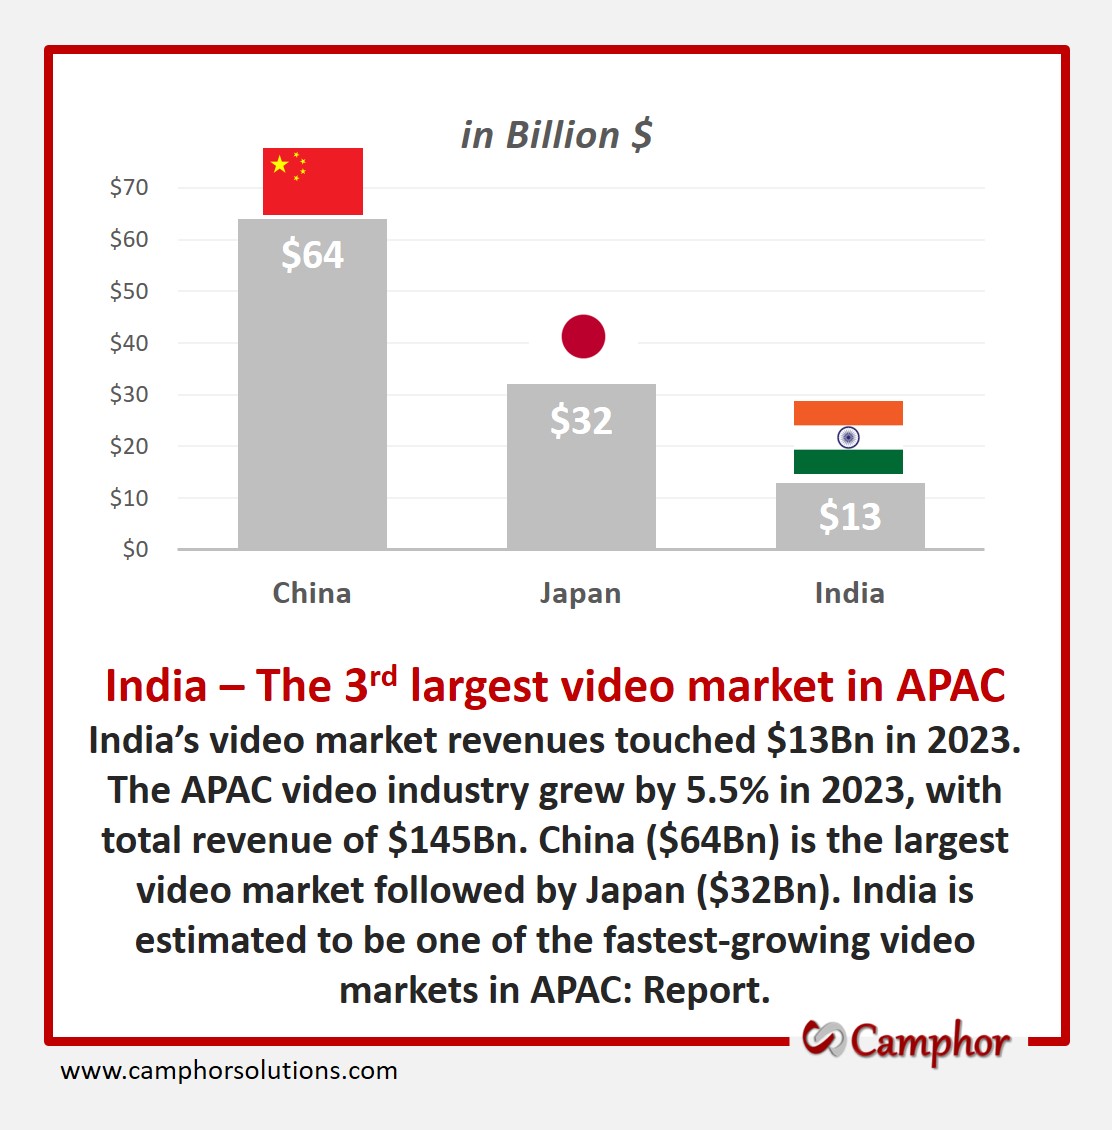 India is the 3rd largest video market in APAC. #camphorsolutions #apacnations #videomarketing #OnlineMarketing #DigitalMarketing #videomarket #china #japan #india #seo #smo #searchengineoptimization #socialmedia